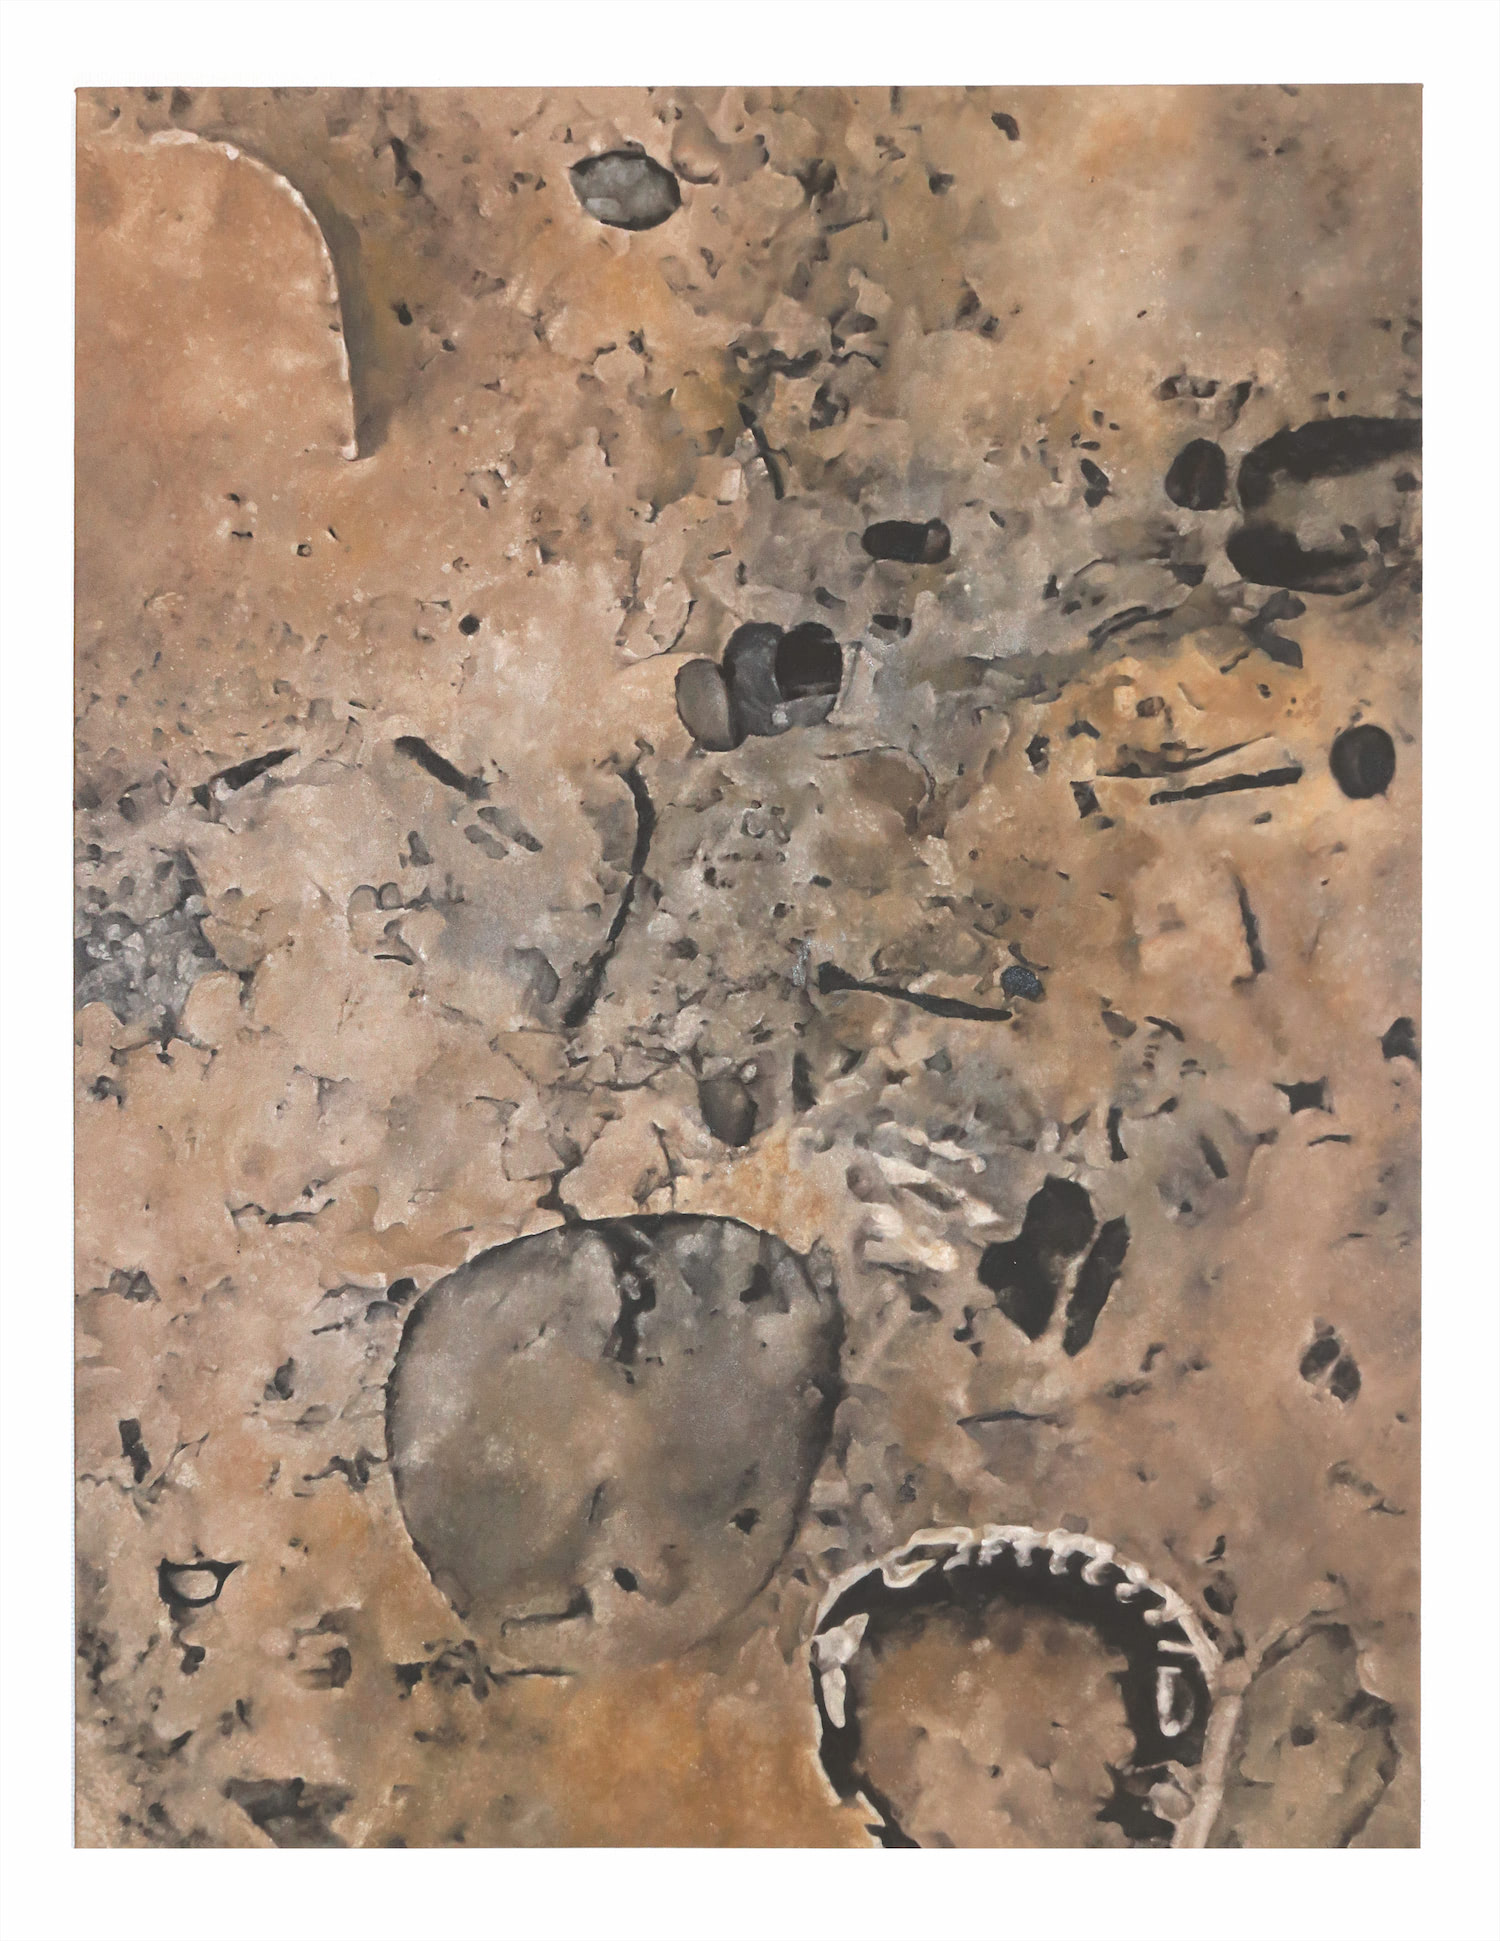 A brown and grey sedimentary rock speckled with dark holes and crevices painted on a vertical, rectangular canvas. Embedded in the surface are fragments of tiny bones and fossils from various organisms.